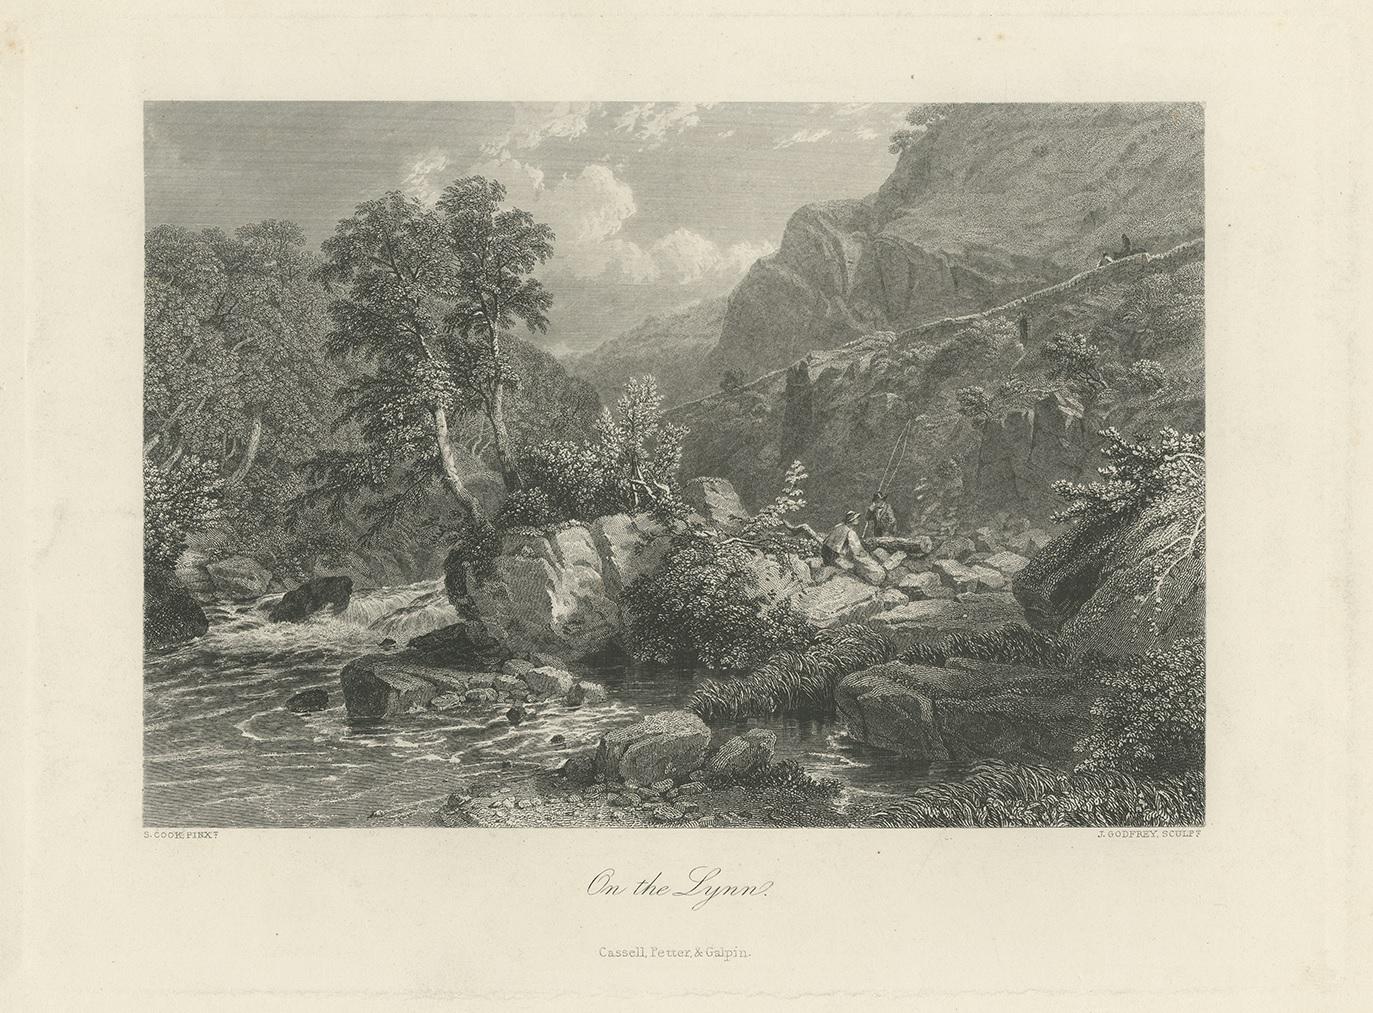 Antique print titled 'On the Lynn'. Steel engraved view of River Lyne, a river of Cumbria in England. Published by Cassell, Petter & Galpin.